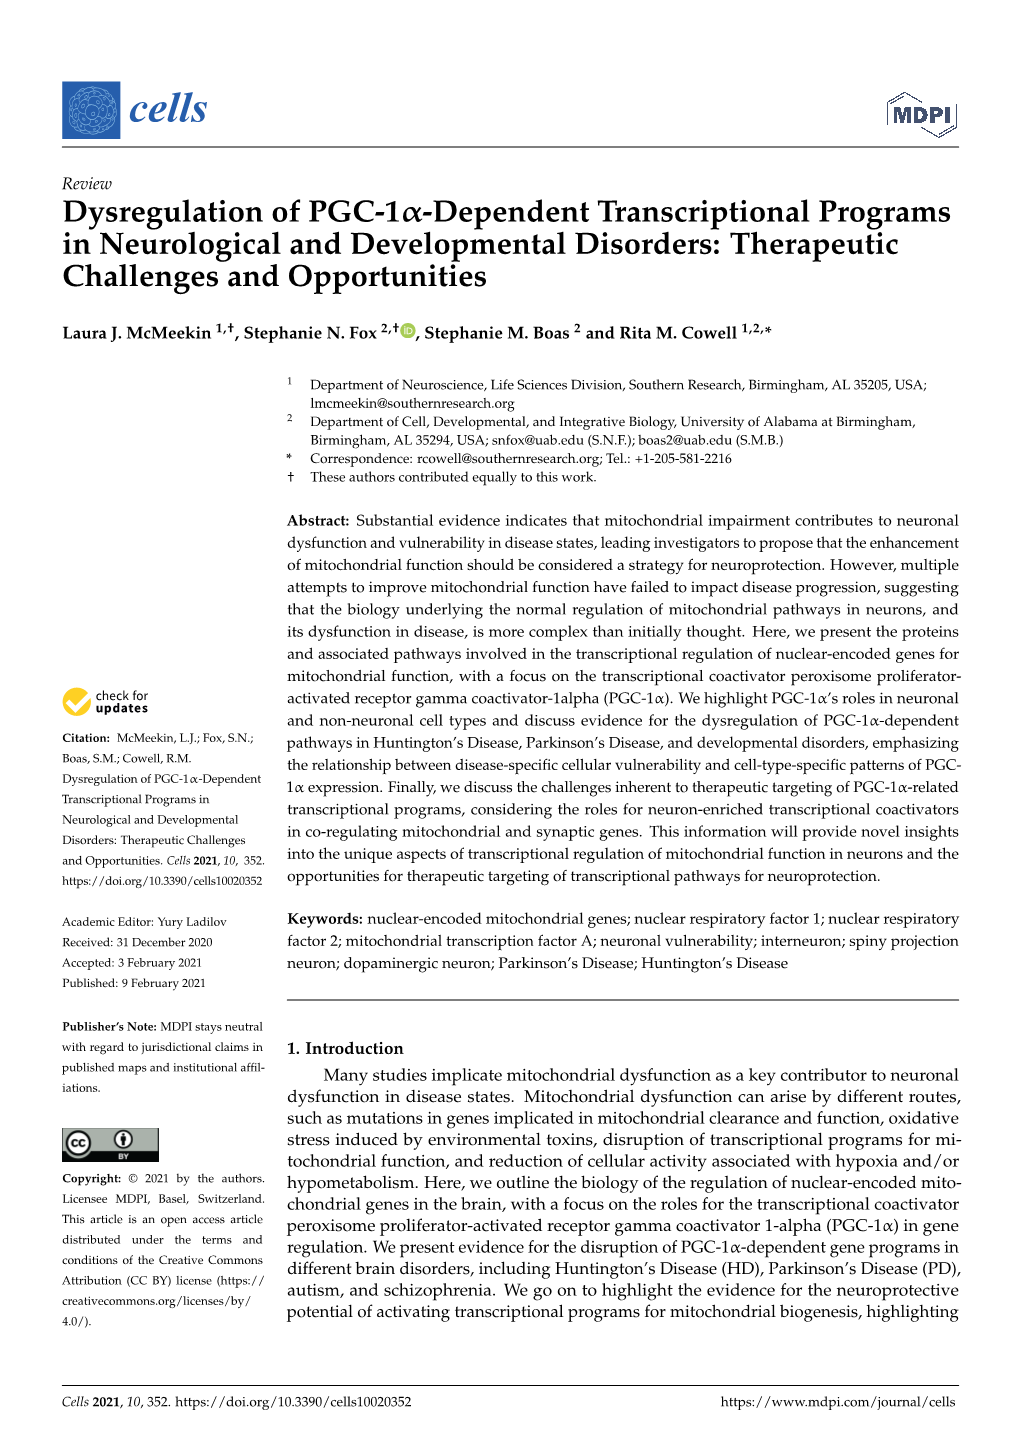 Dysregulation of PGC-1Α-Dependent Transcriptional Programs in Neurological and Developmental Disorders: Therapeutic Challenges and Opportunities